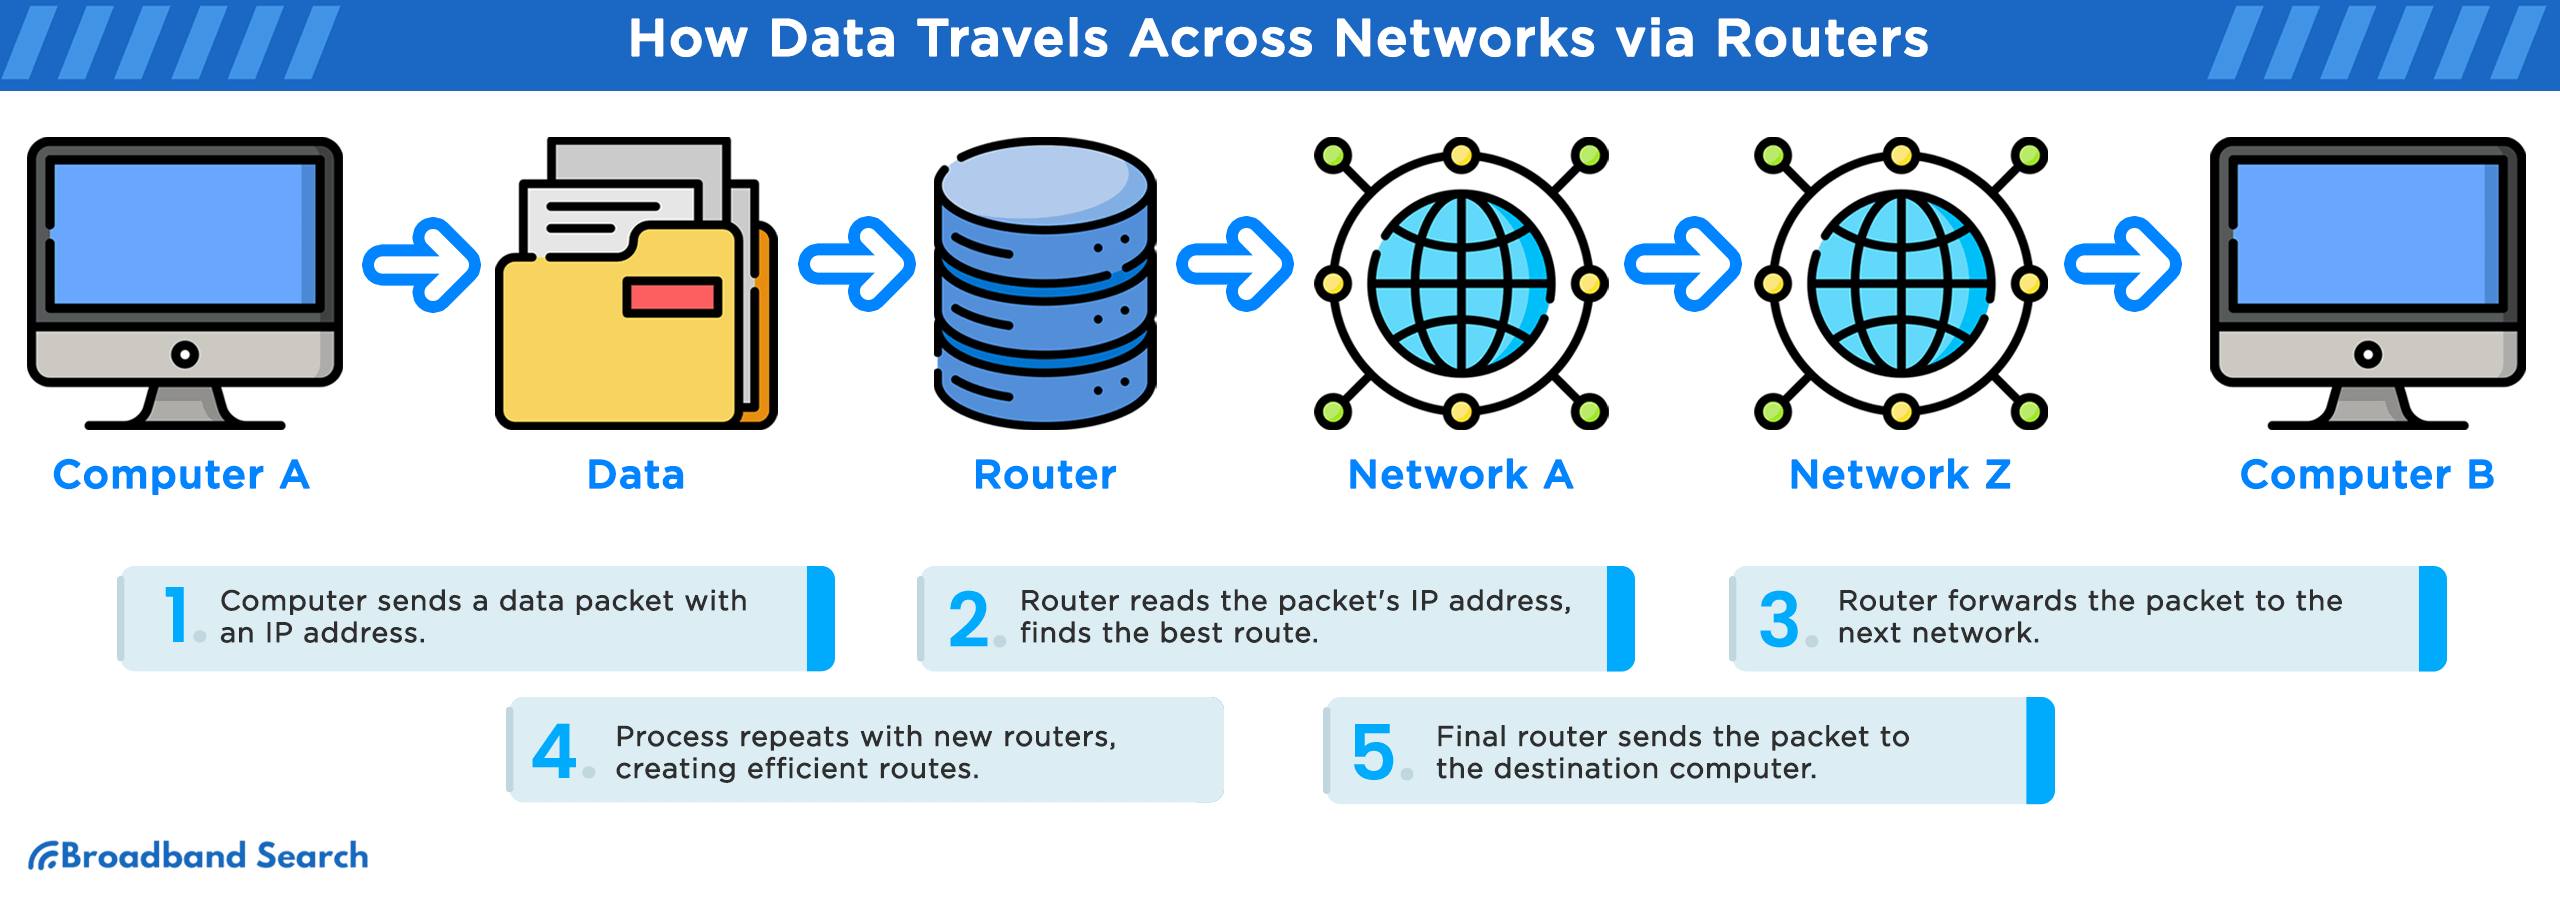 How data travels across networks via routers